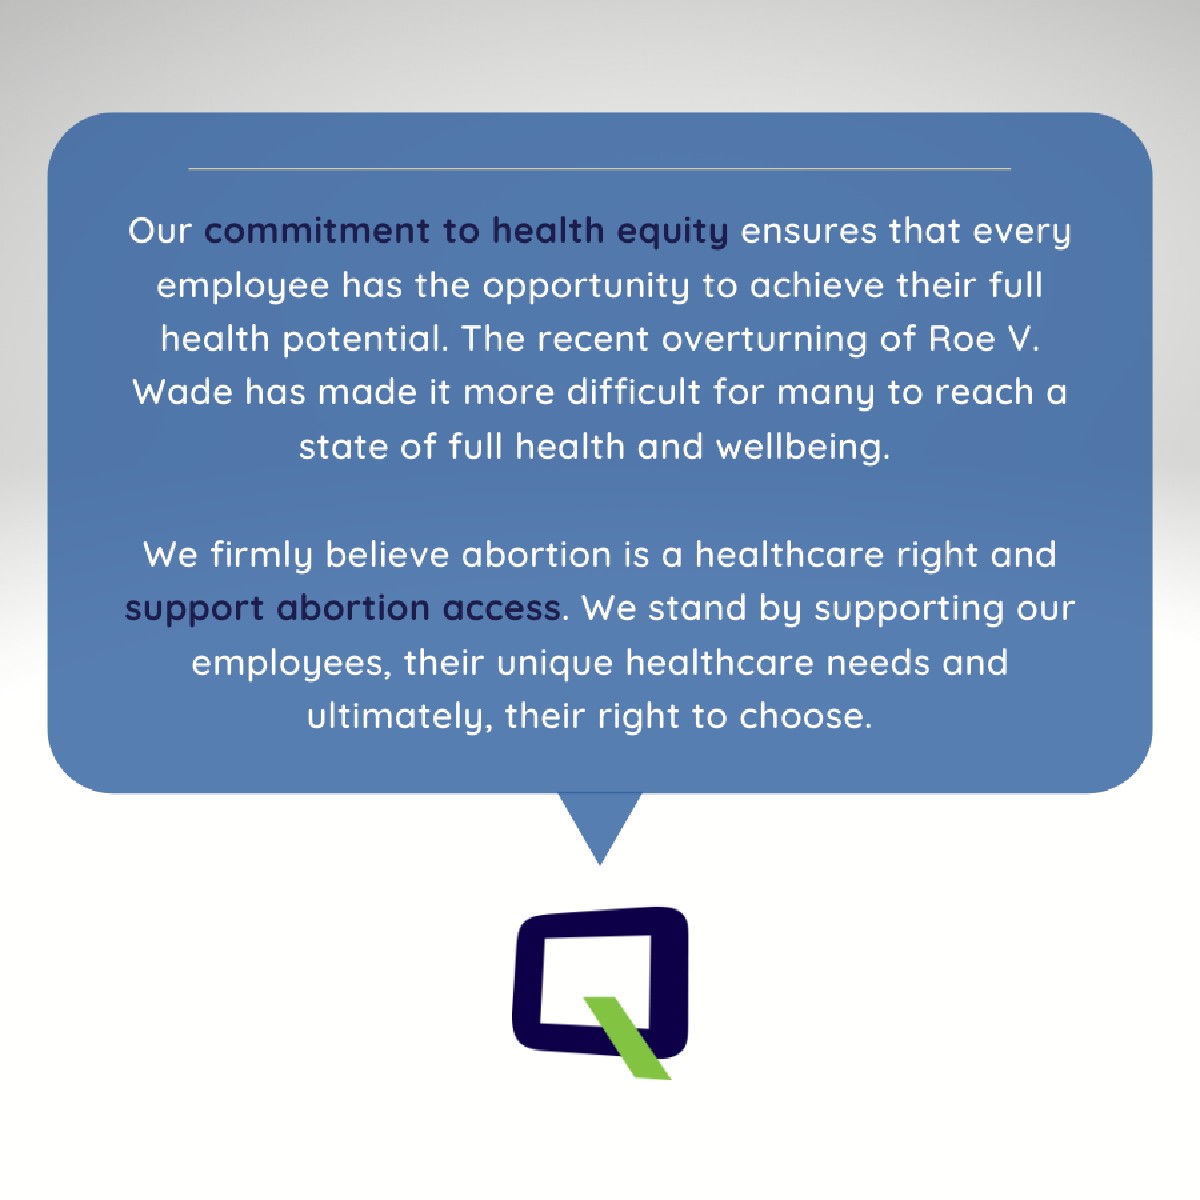 If you would like to learn more about know how you, too, can show up for abortion access, visit: fal.cn/3qVcI #RoeVWade #HealthEquity #healthcare